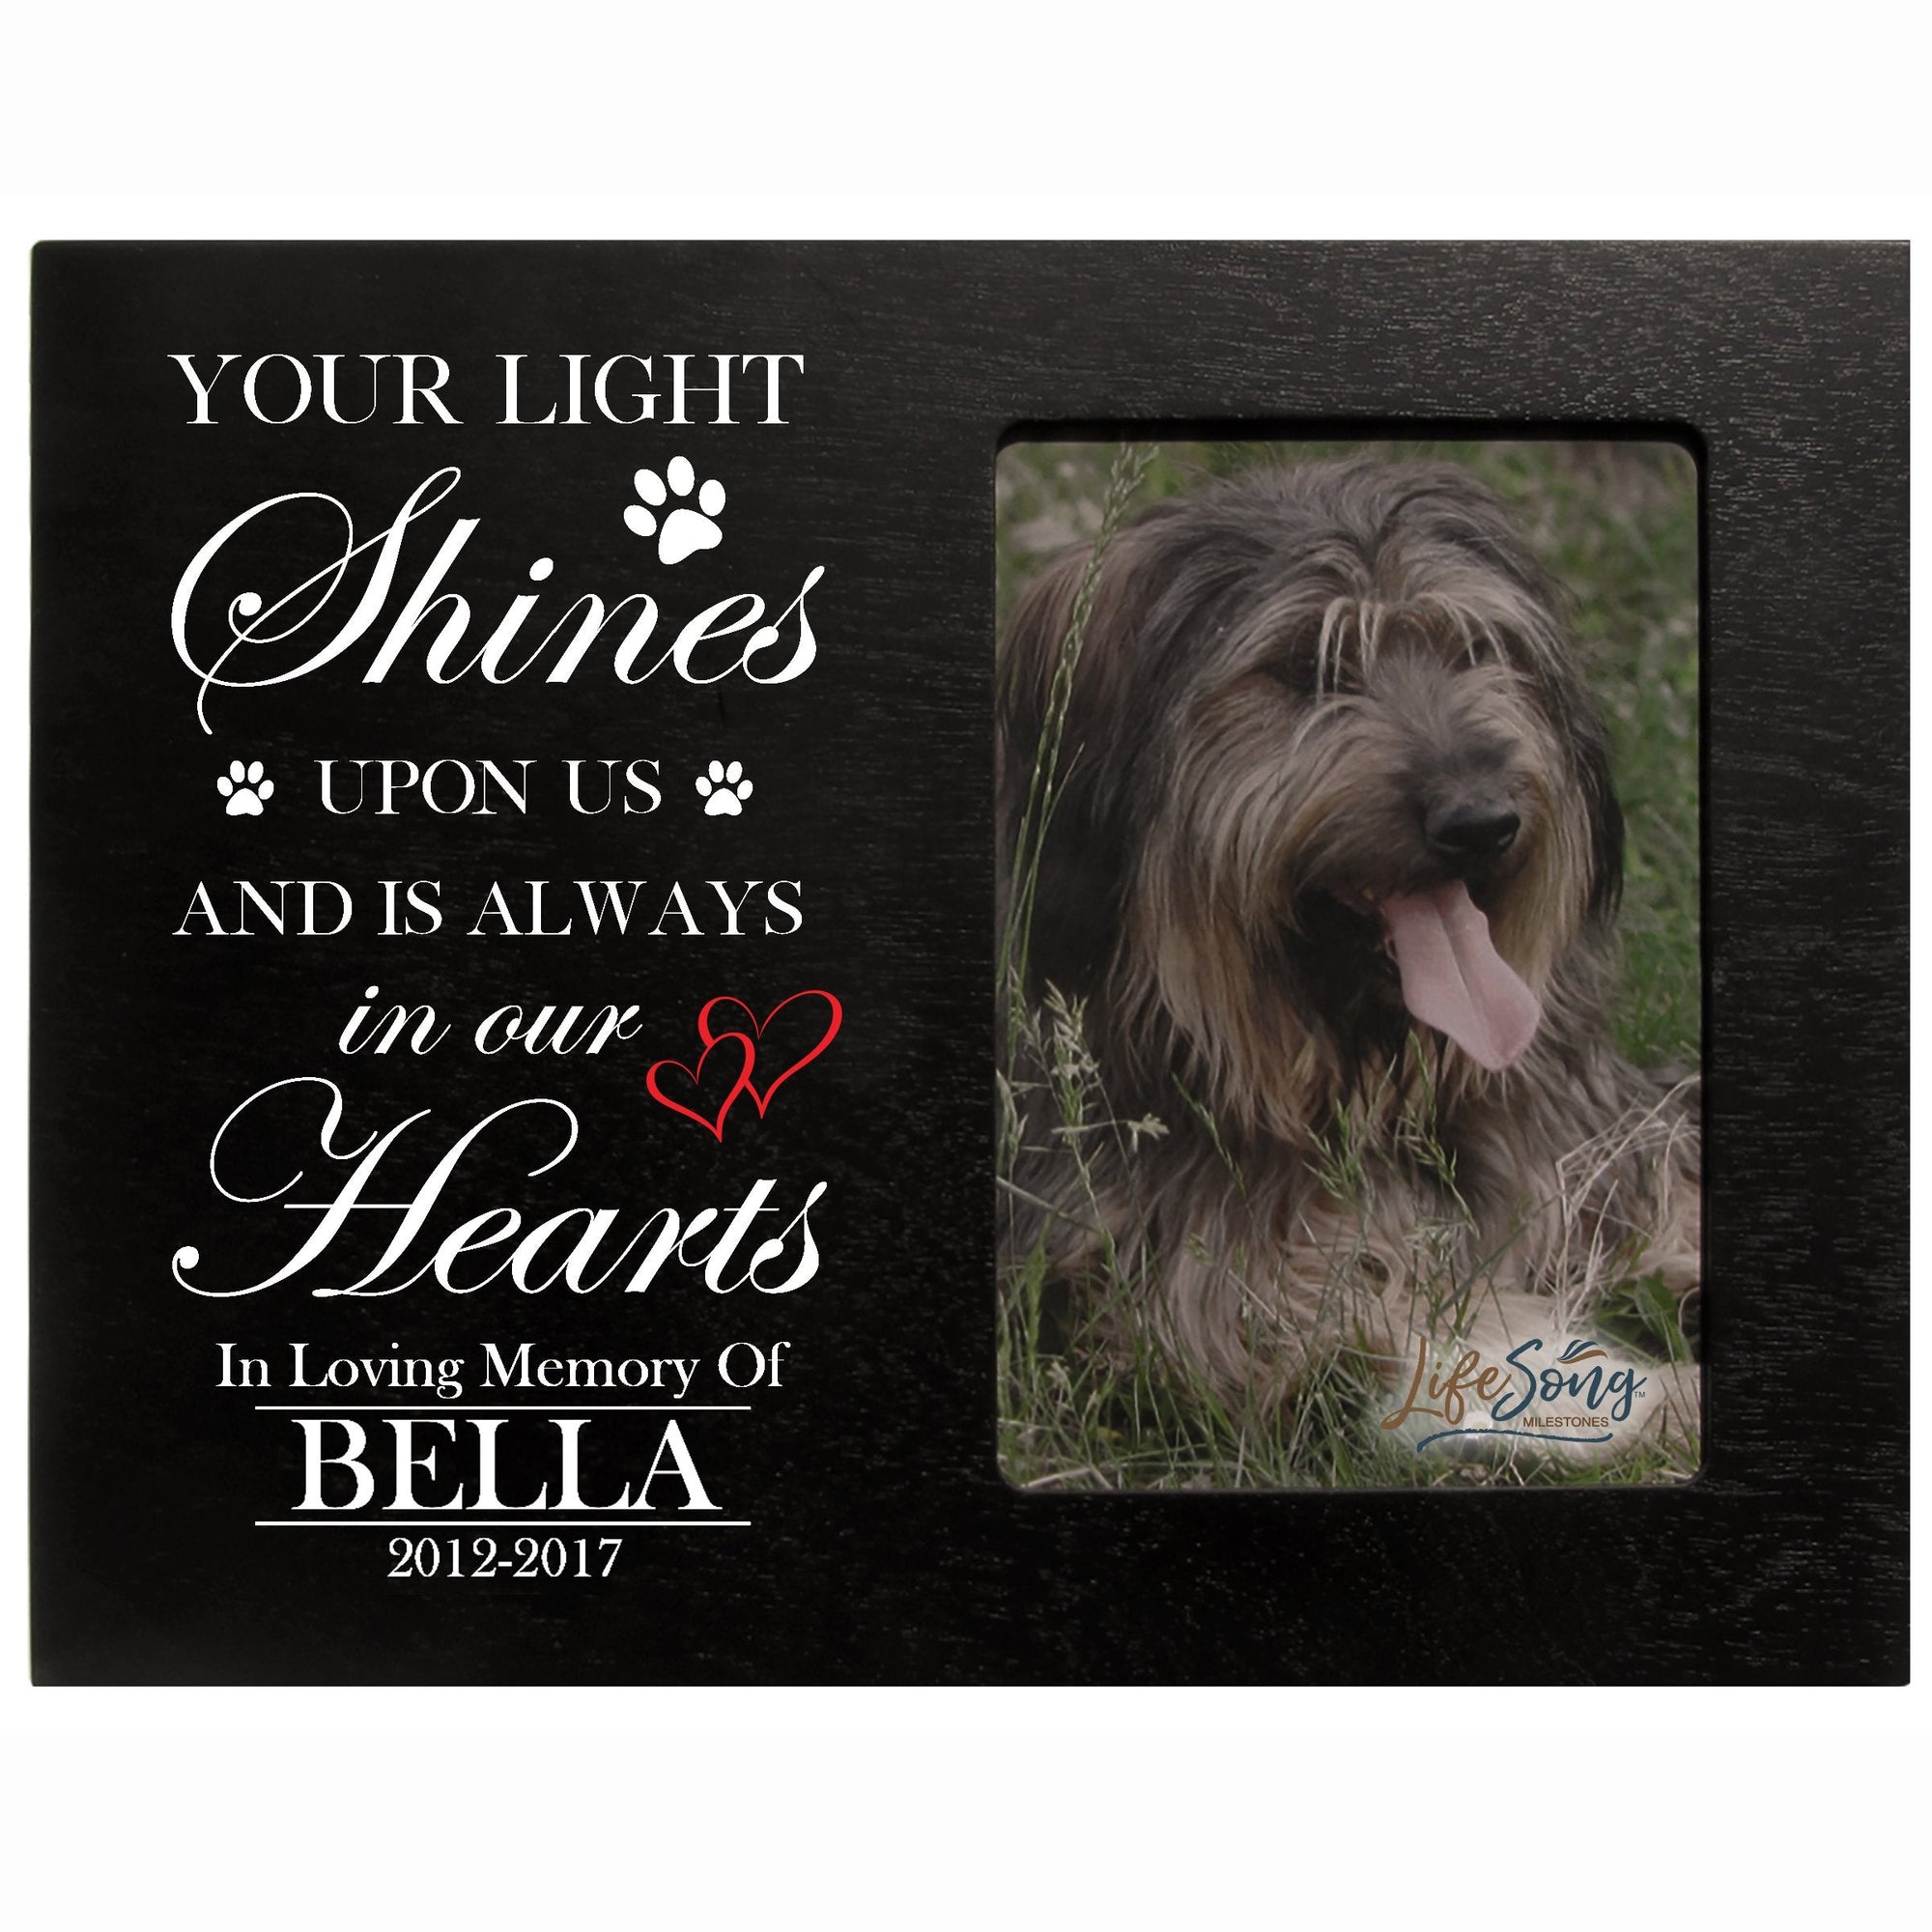 8x10 Black Pet Memorial Picture Frame with the phrase "Your Light Shines Upon Us"